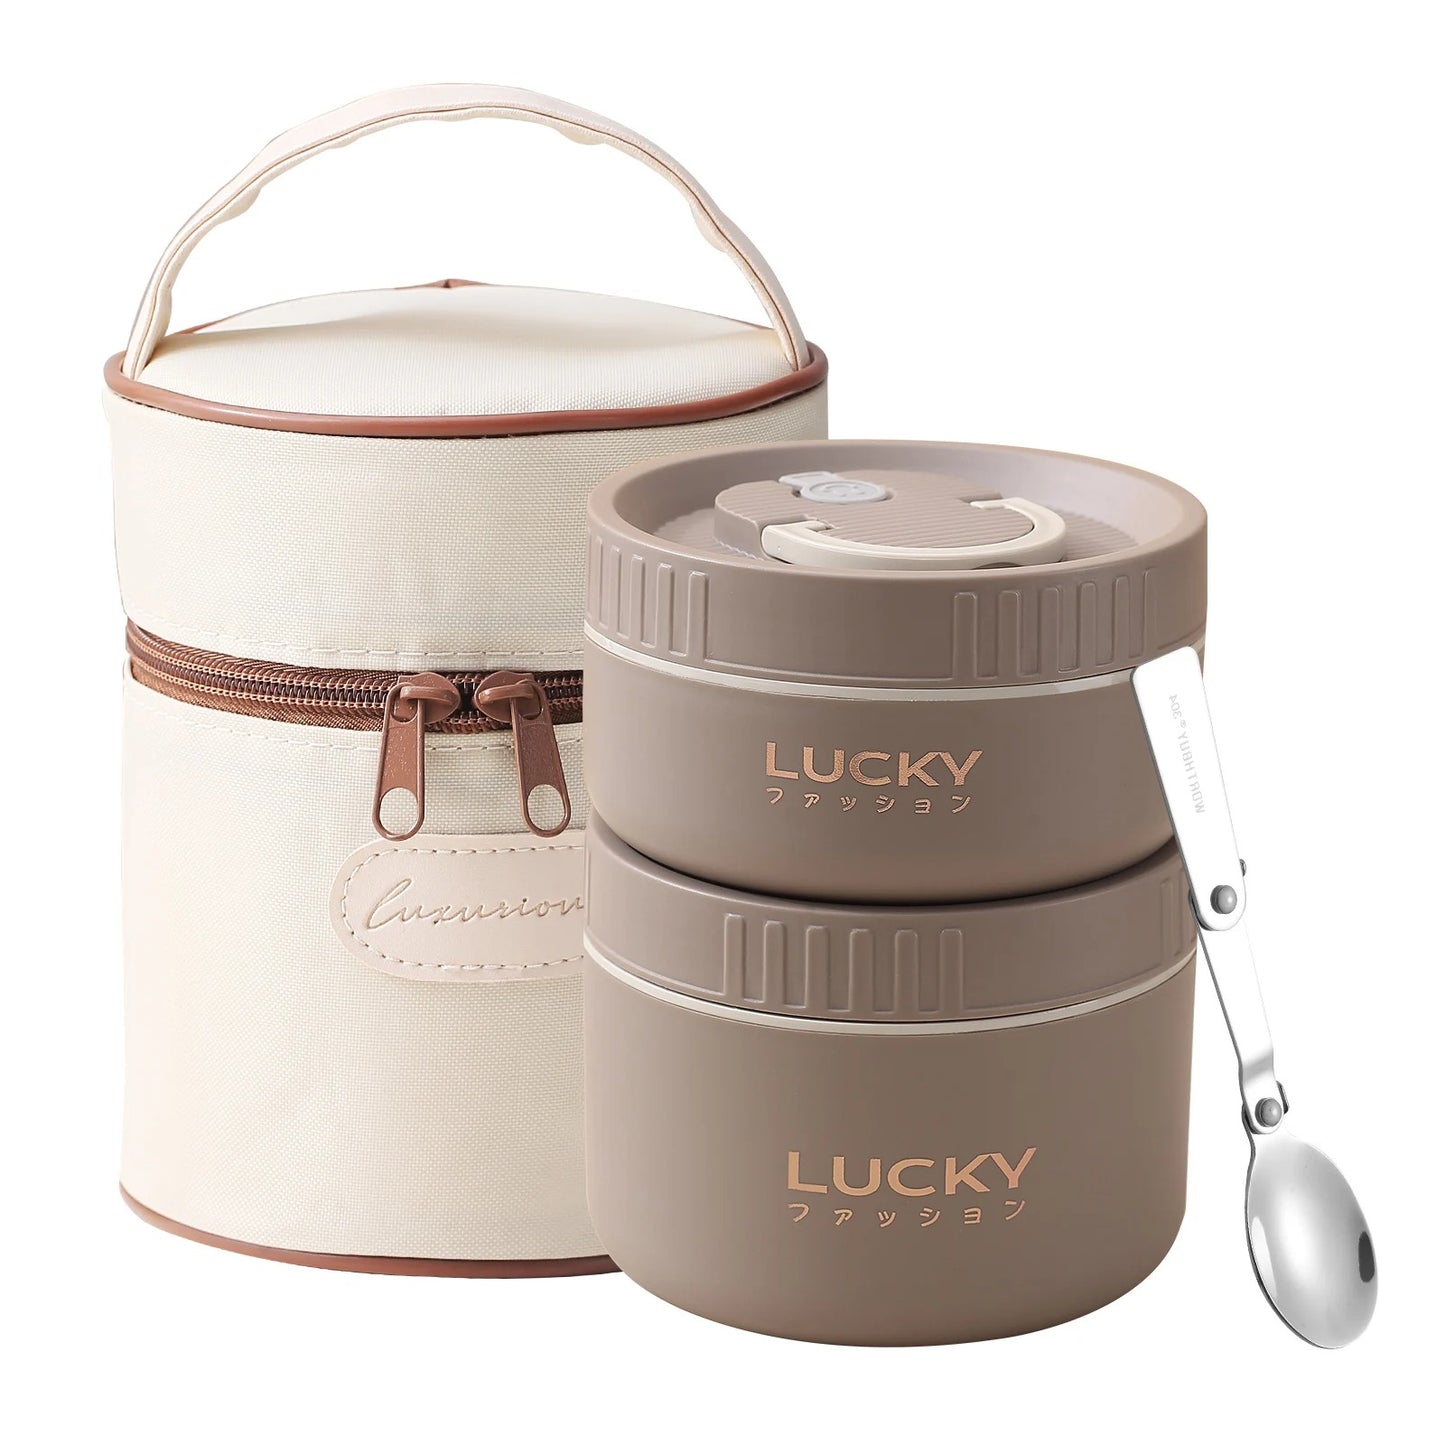 Portable Stainless Steel Insulated Lunch Box